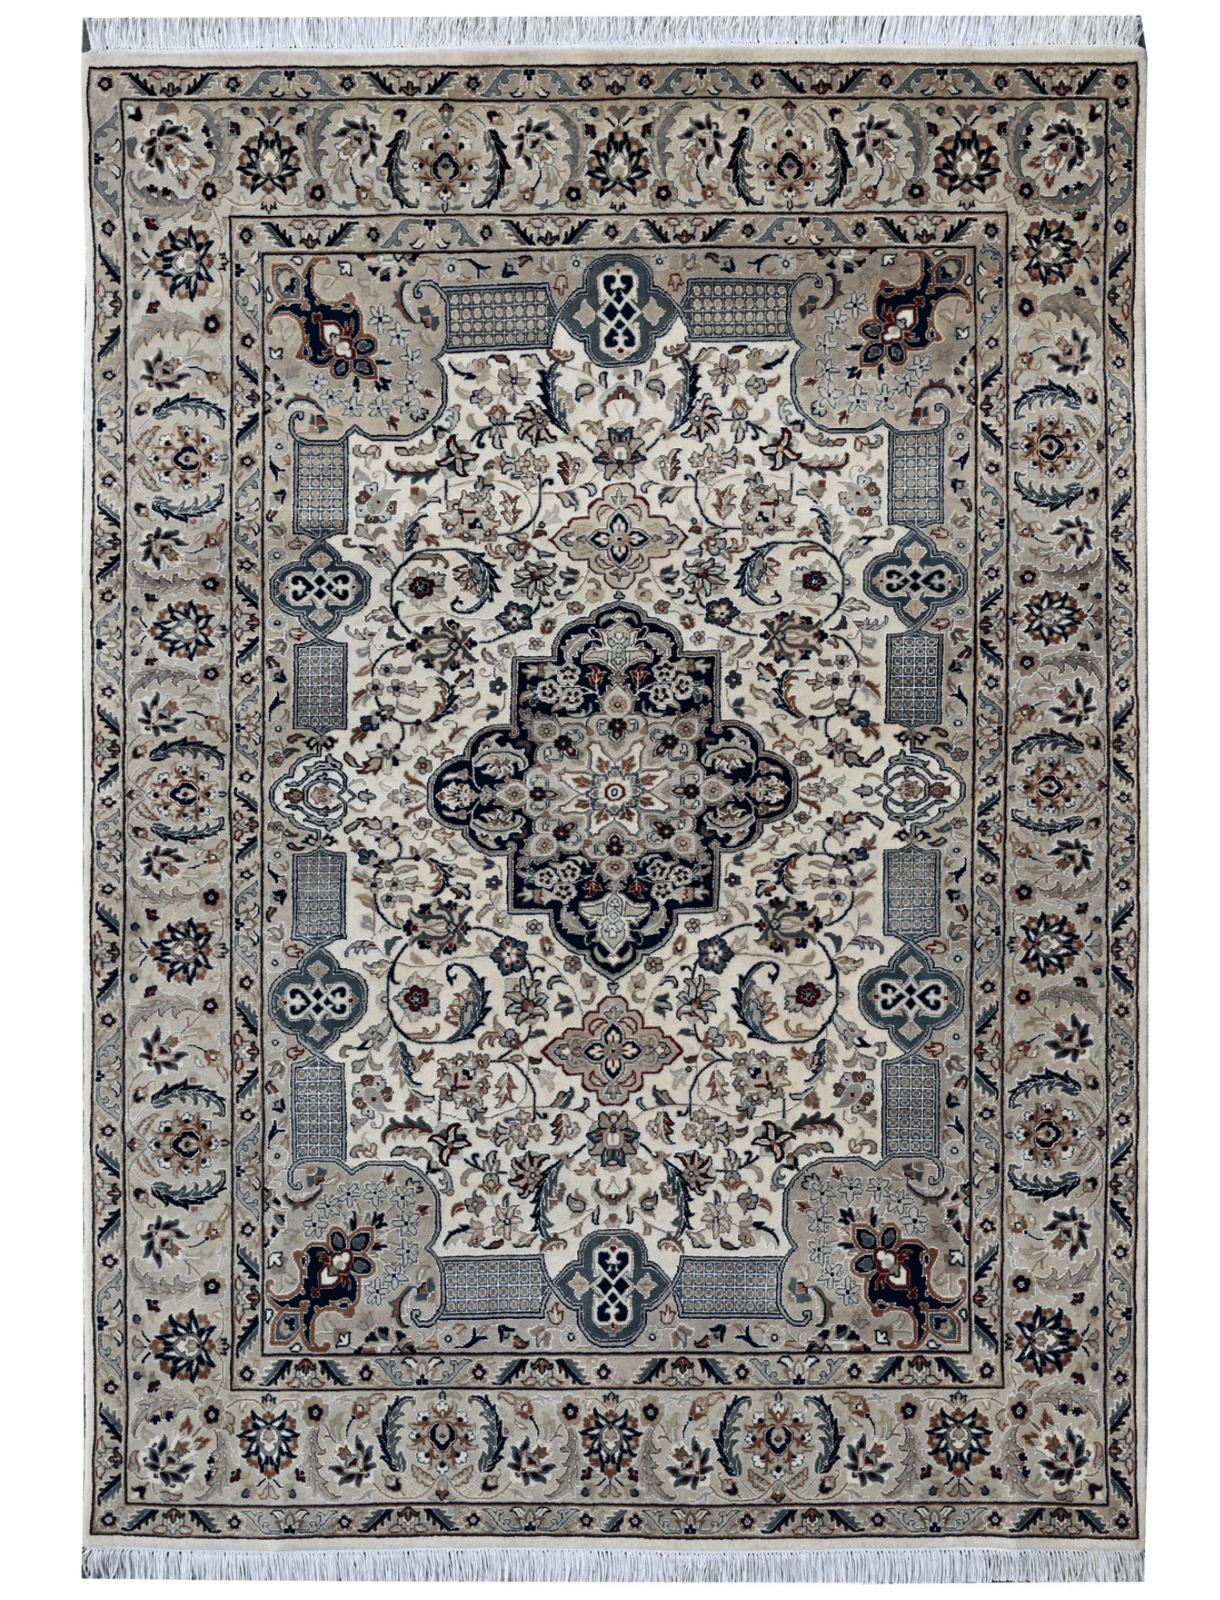 NAIN 5x8ft Handknotted Rug Luxury Look Carpet Wool Handmade Traditional Area Rug